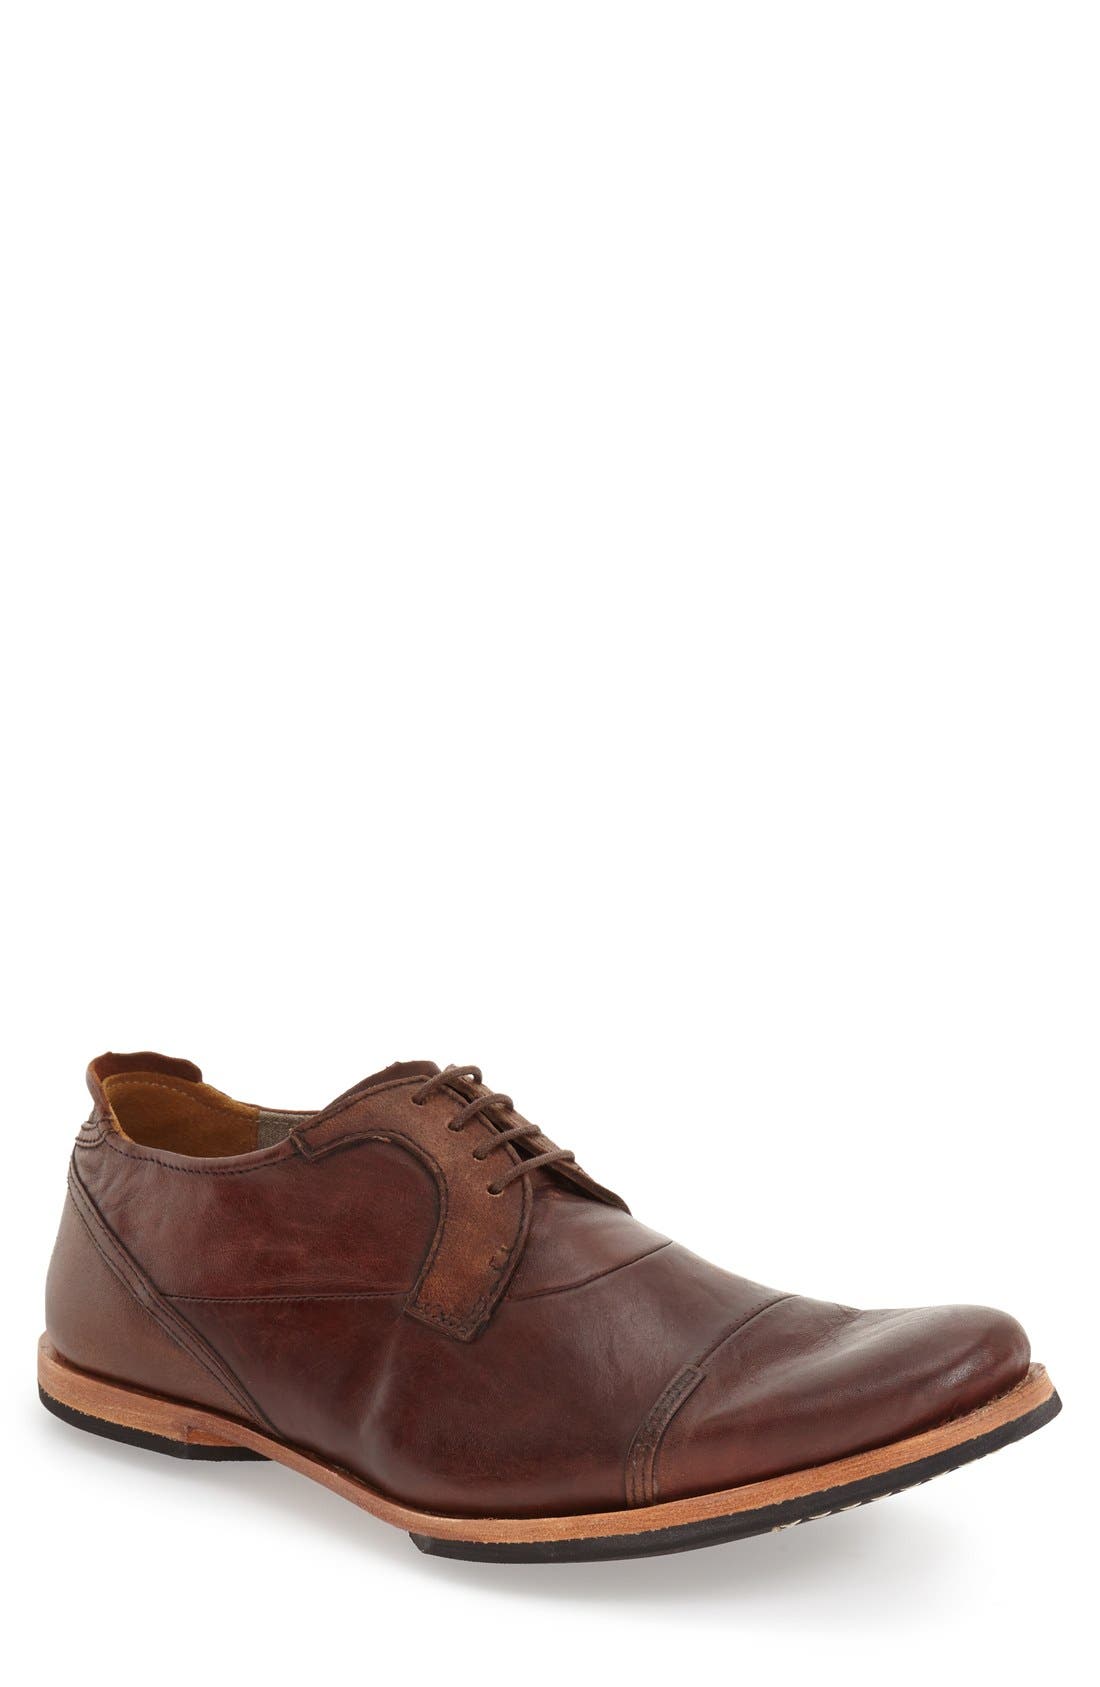 timberland wodehouse cap toe oxford shoes